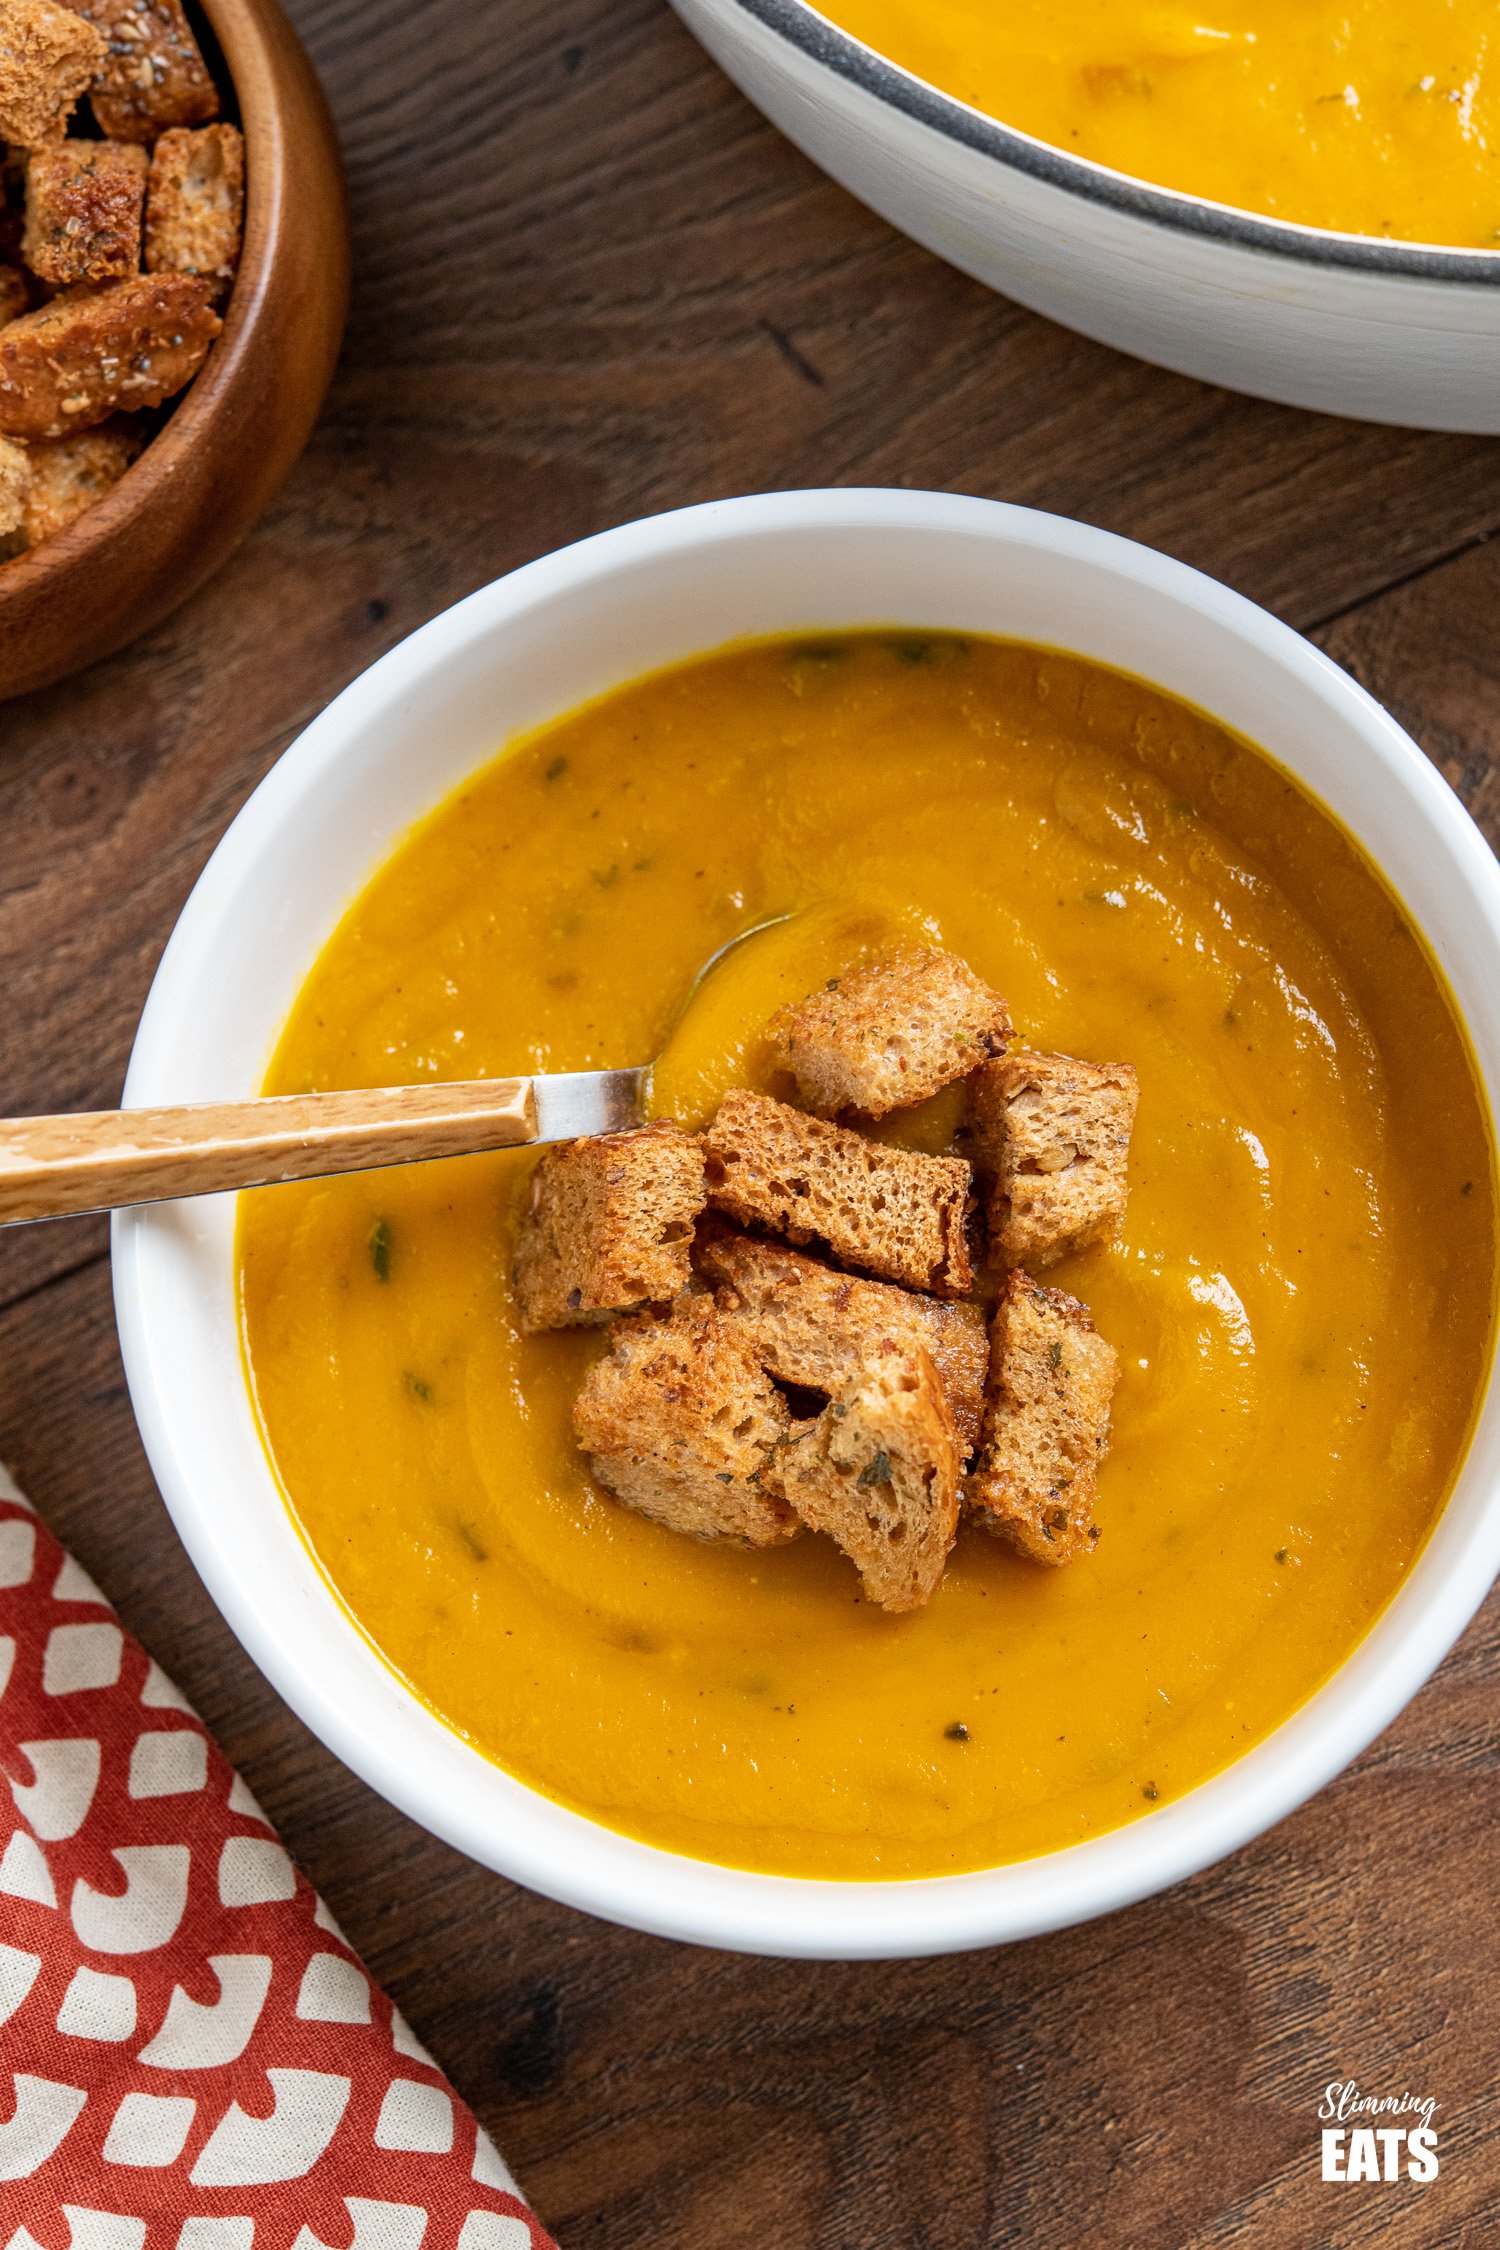 over the top view of Butternut Squash soup with Garlic Herb Croutons in white bowl, with wooden bowl of croutons and pan of soup in background